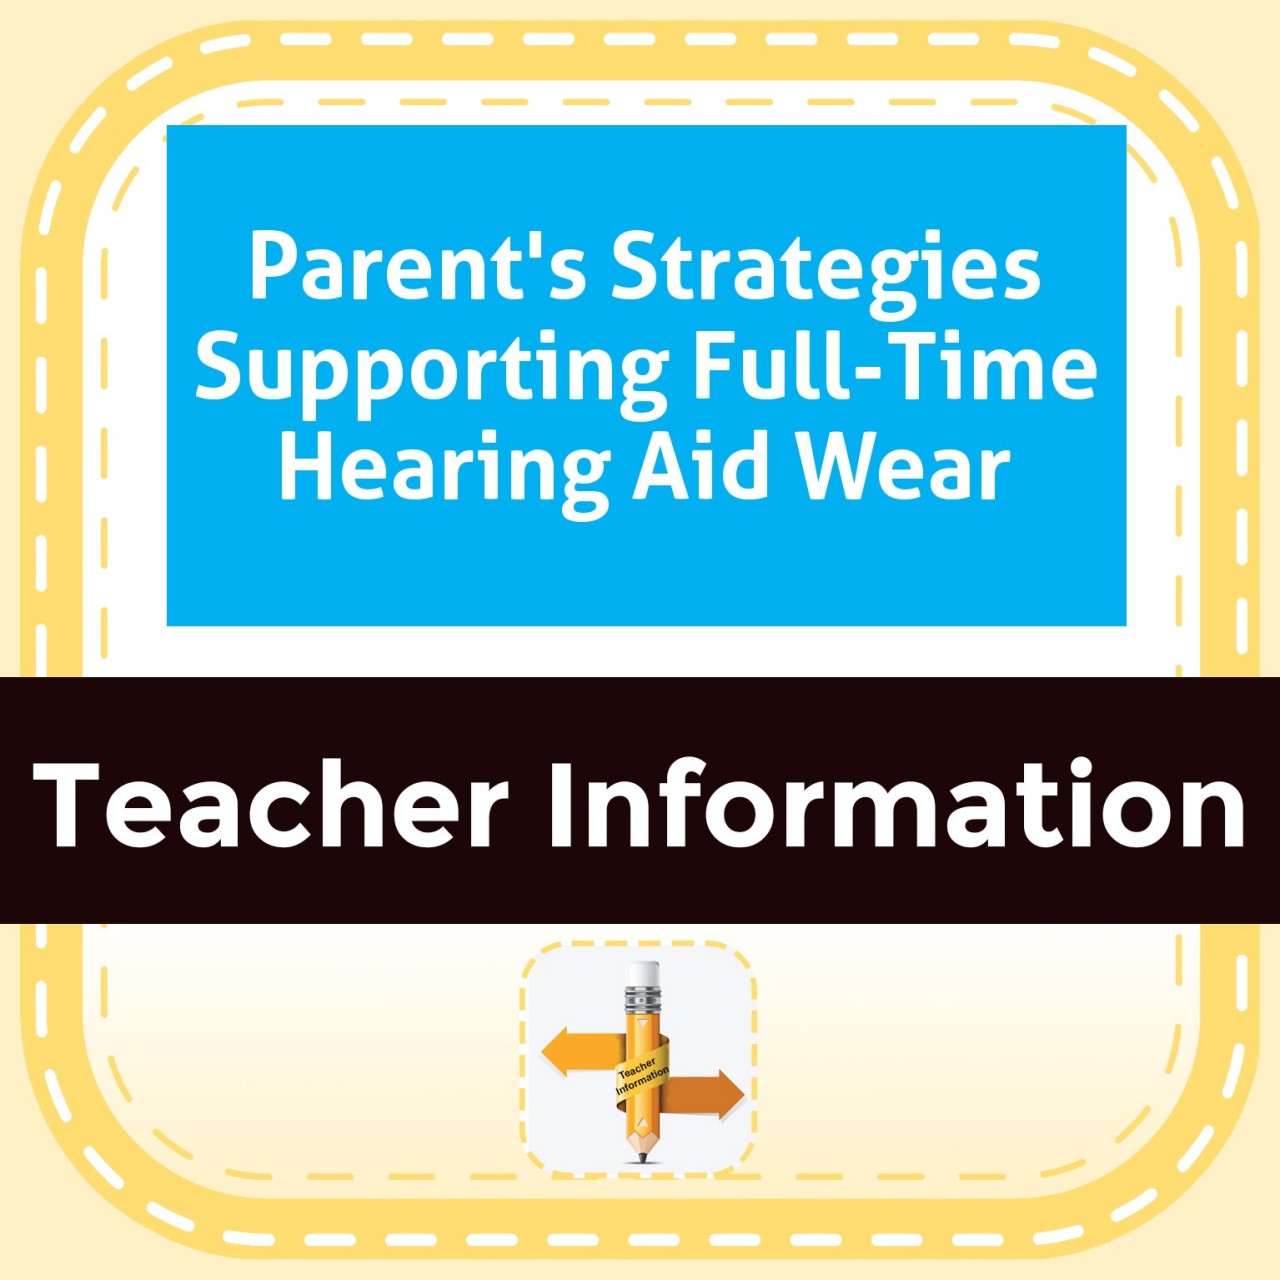 Parent's Strategies Supporting Full-Time Hearing Aid Wear